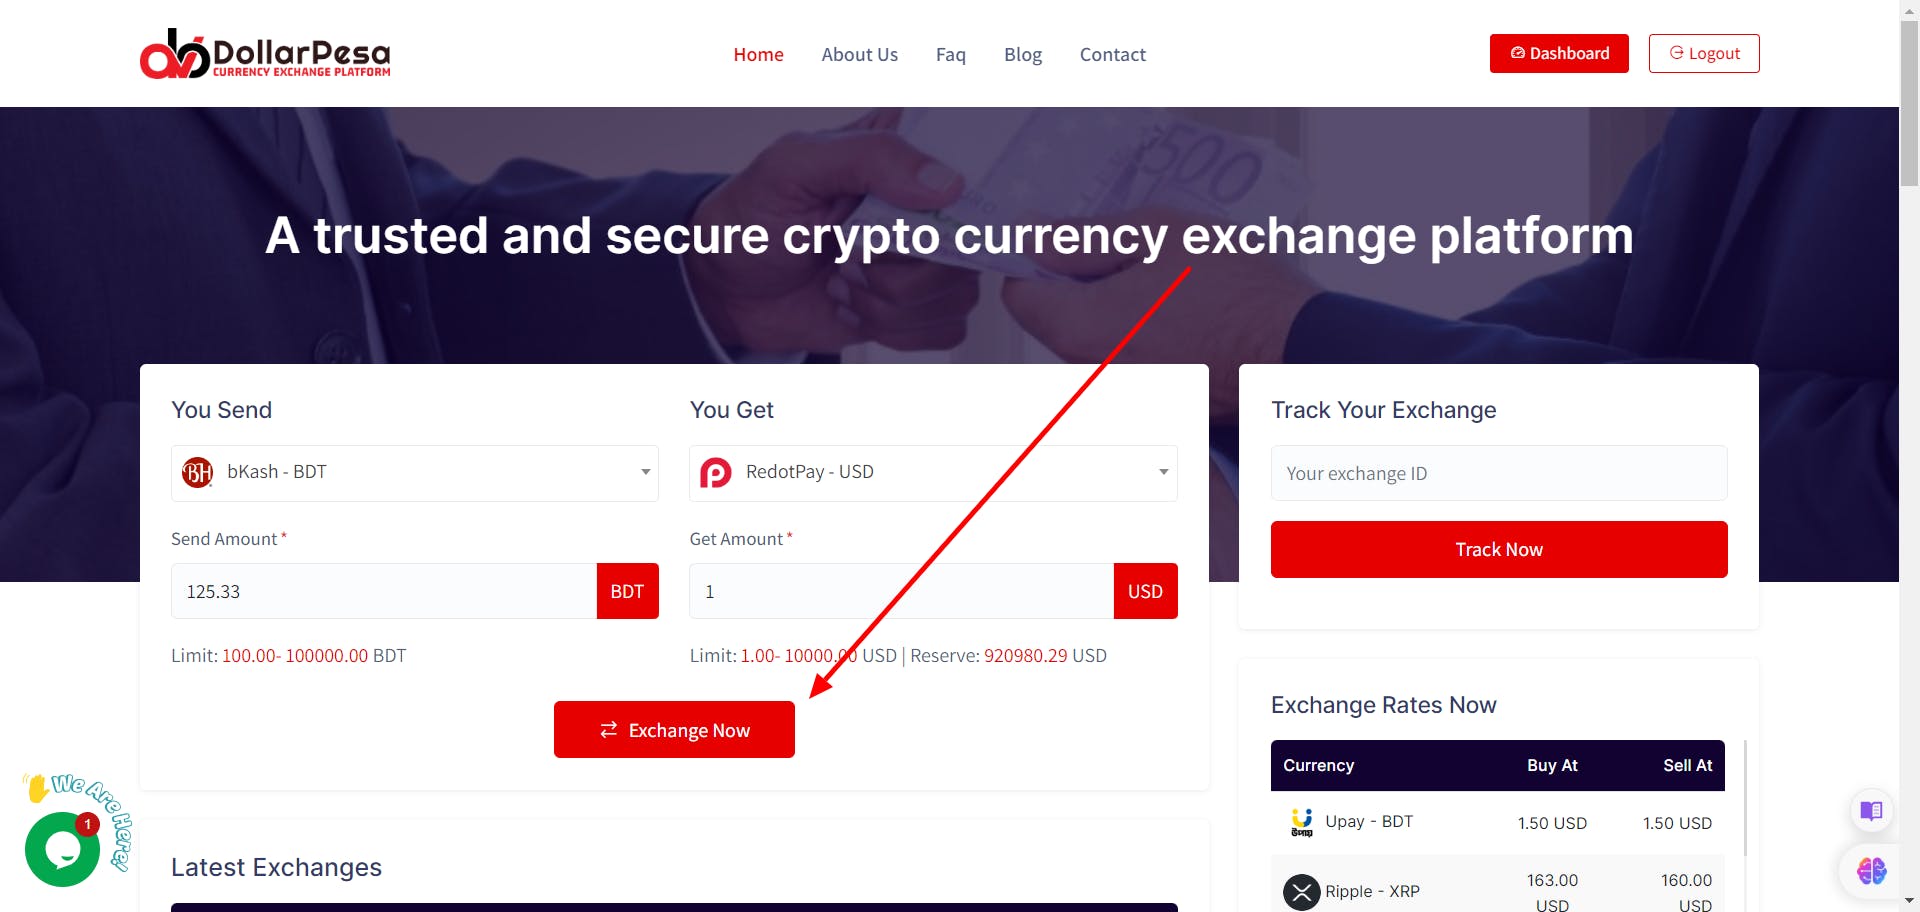 click on the "Exchange Now" button